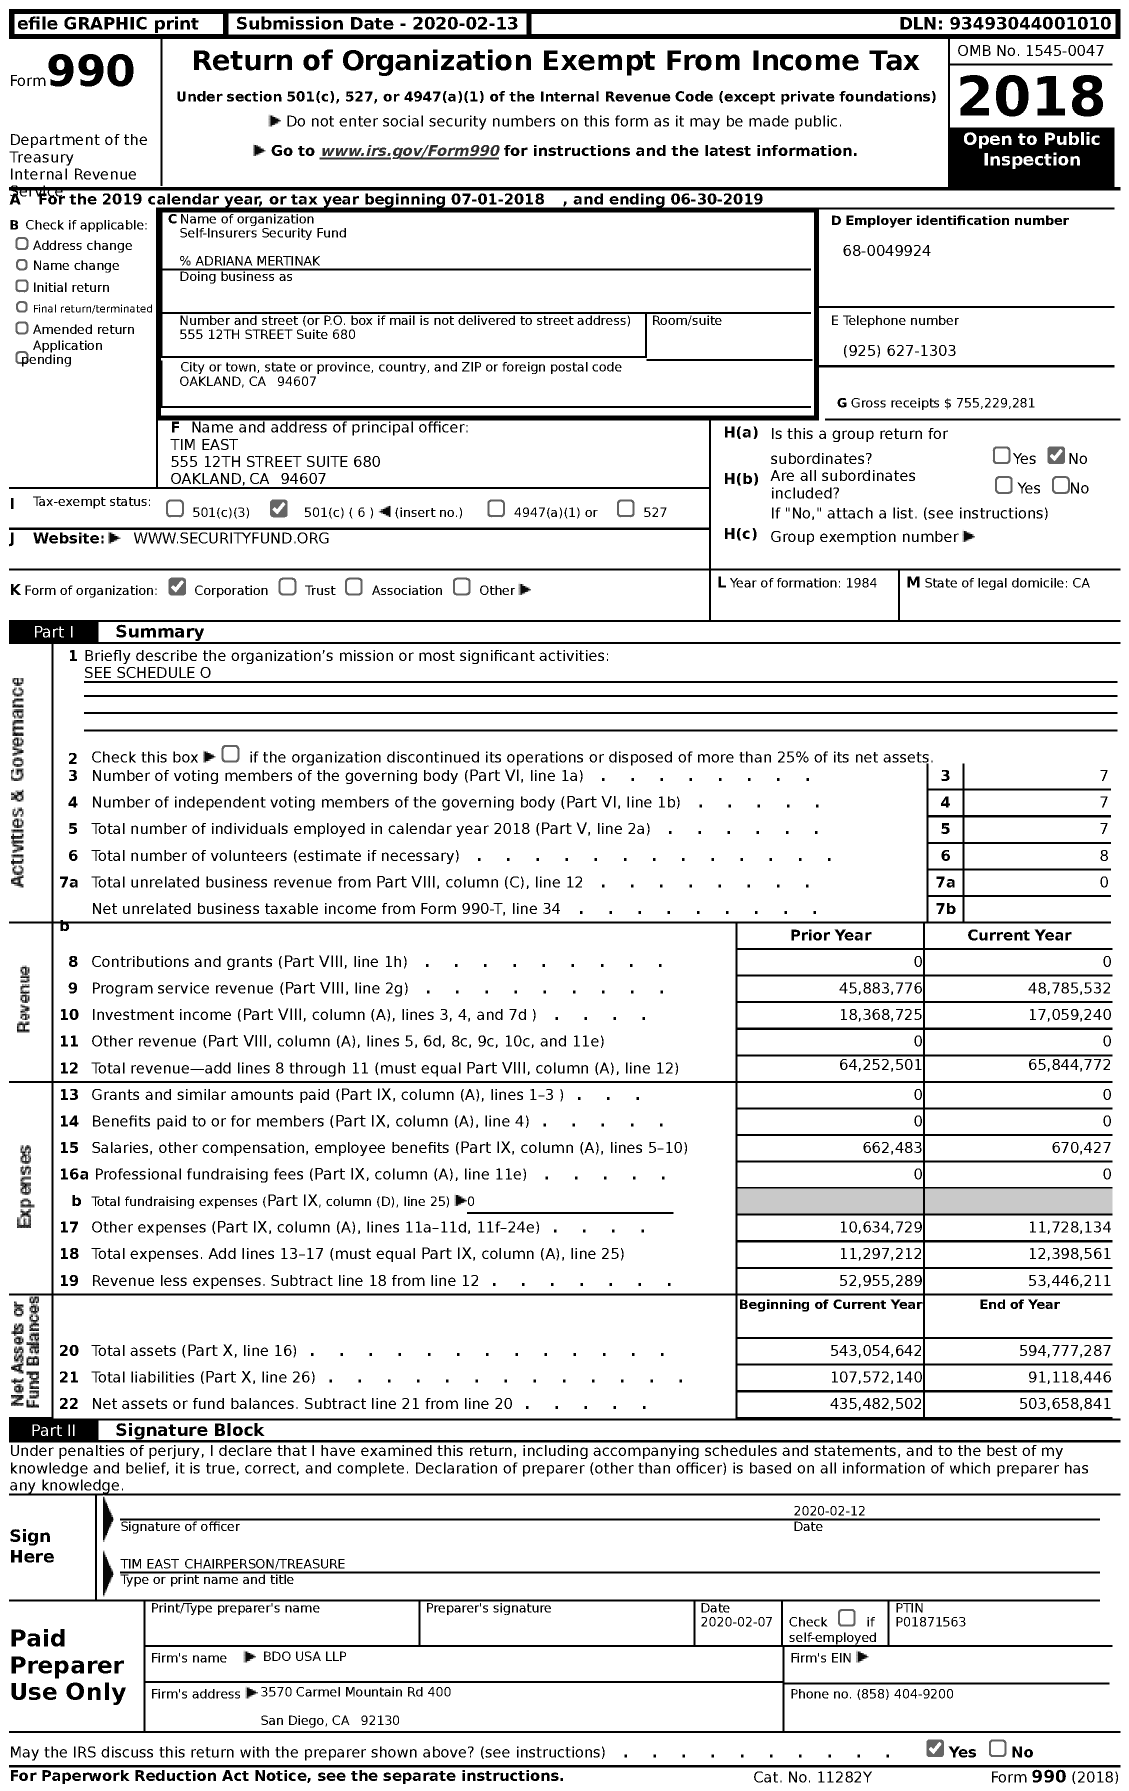 Image of first page of 2018 Form 990 for Self-Insurers Security Fund